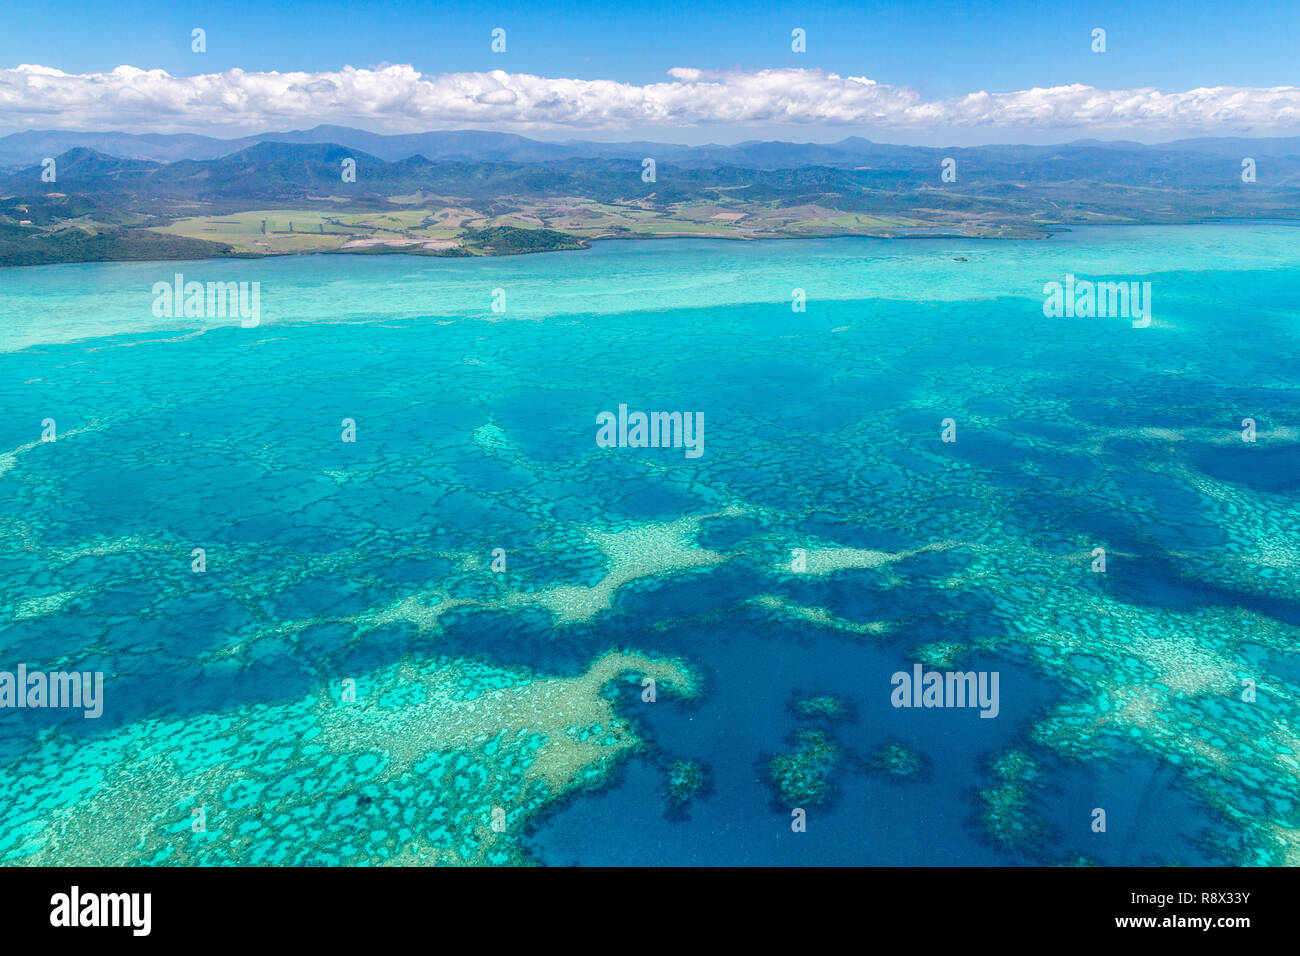 Aerial view of idyllic azure turquoise blue lagoon of West Coast barrier reef, with mountains far in the background, Coral sea, New Caledonia island,  Stock Photo